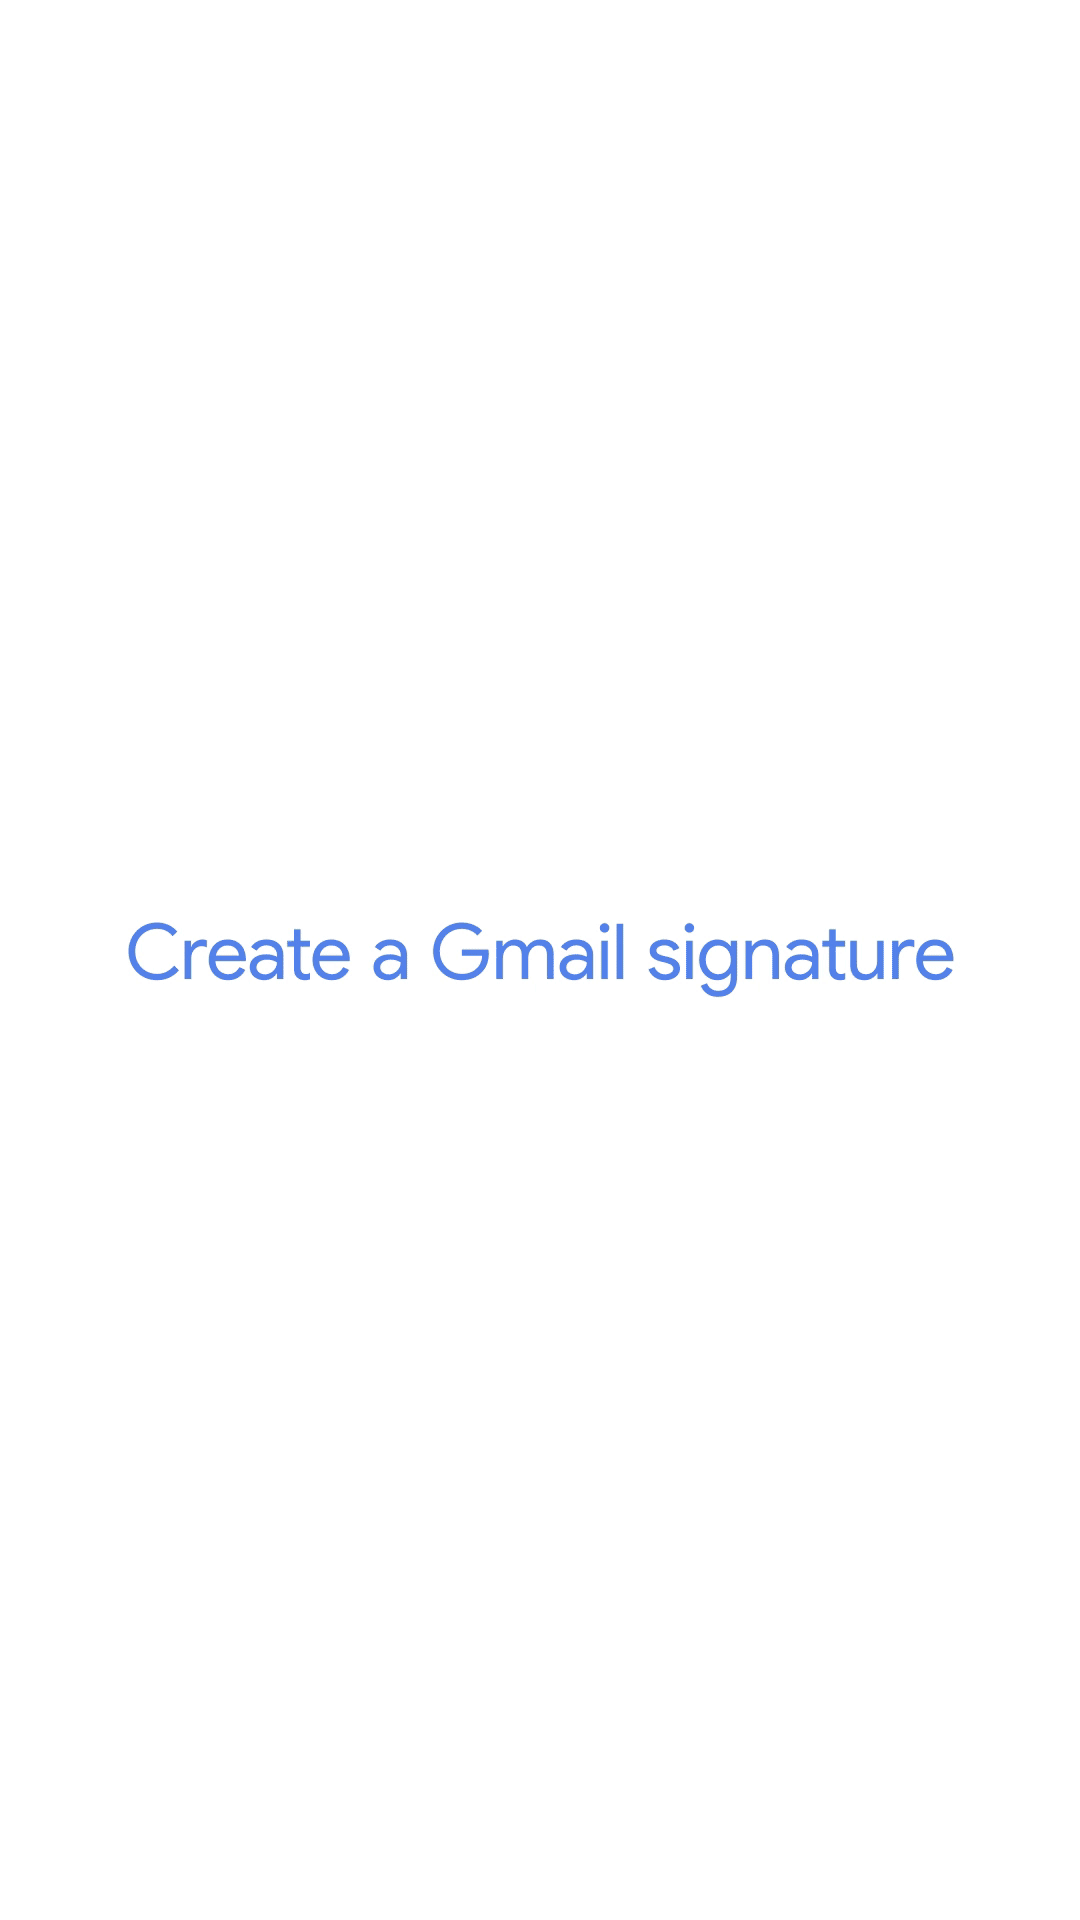 An animation showing how to create a Gmail signature on Android